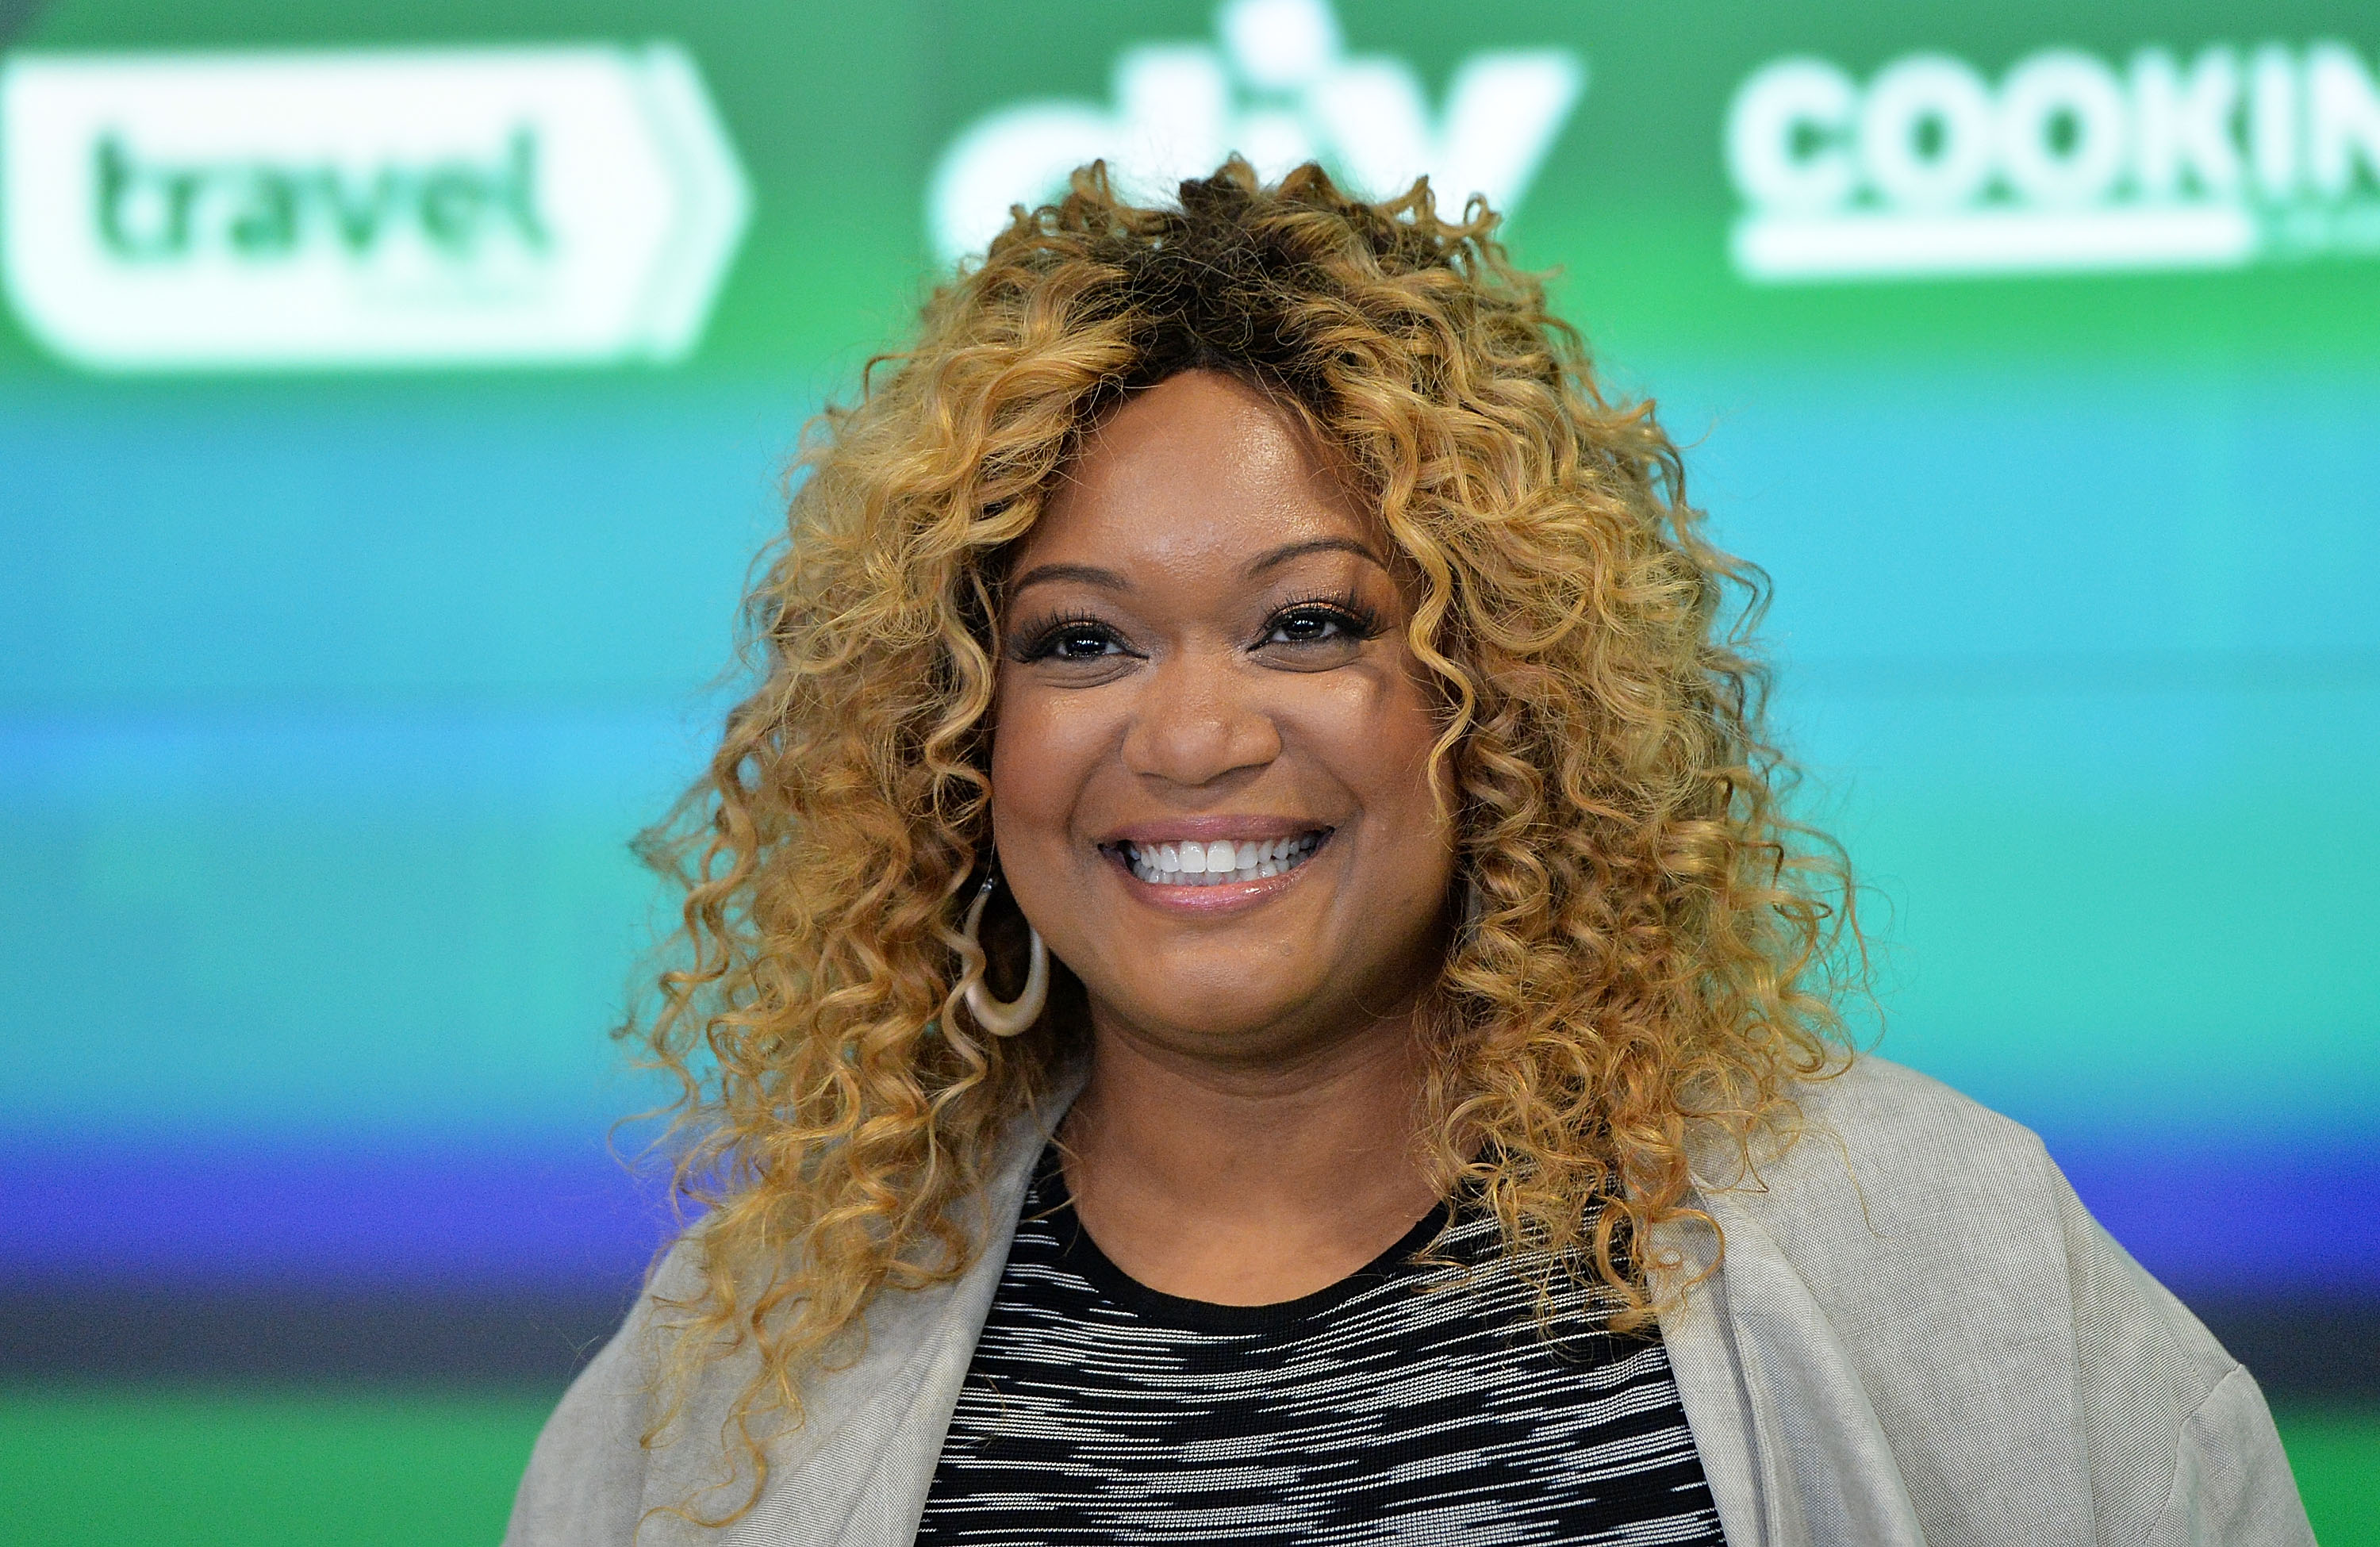 Food Network star Sunny Anderson wears a striped shirt in this 2016 photo.